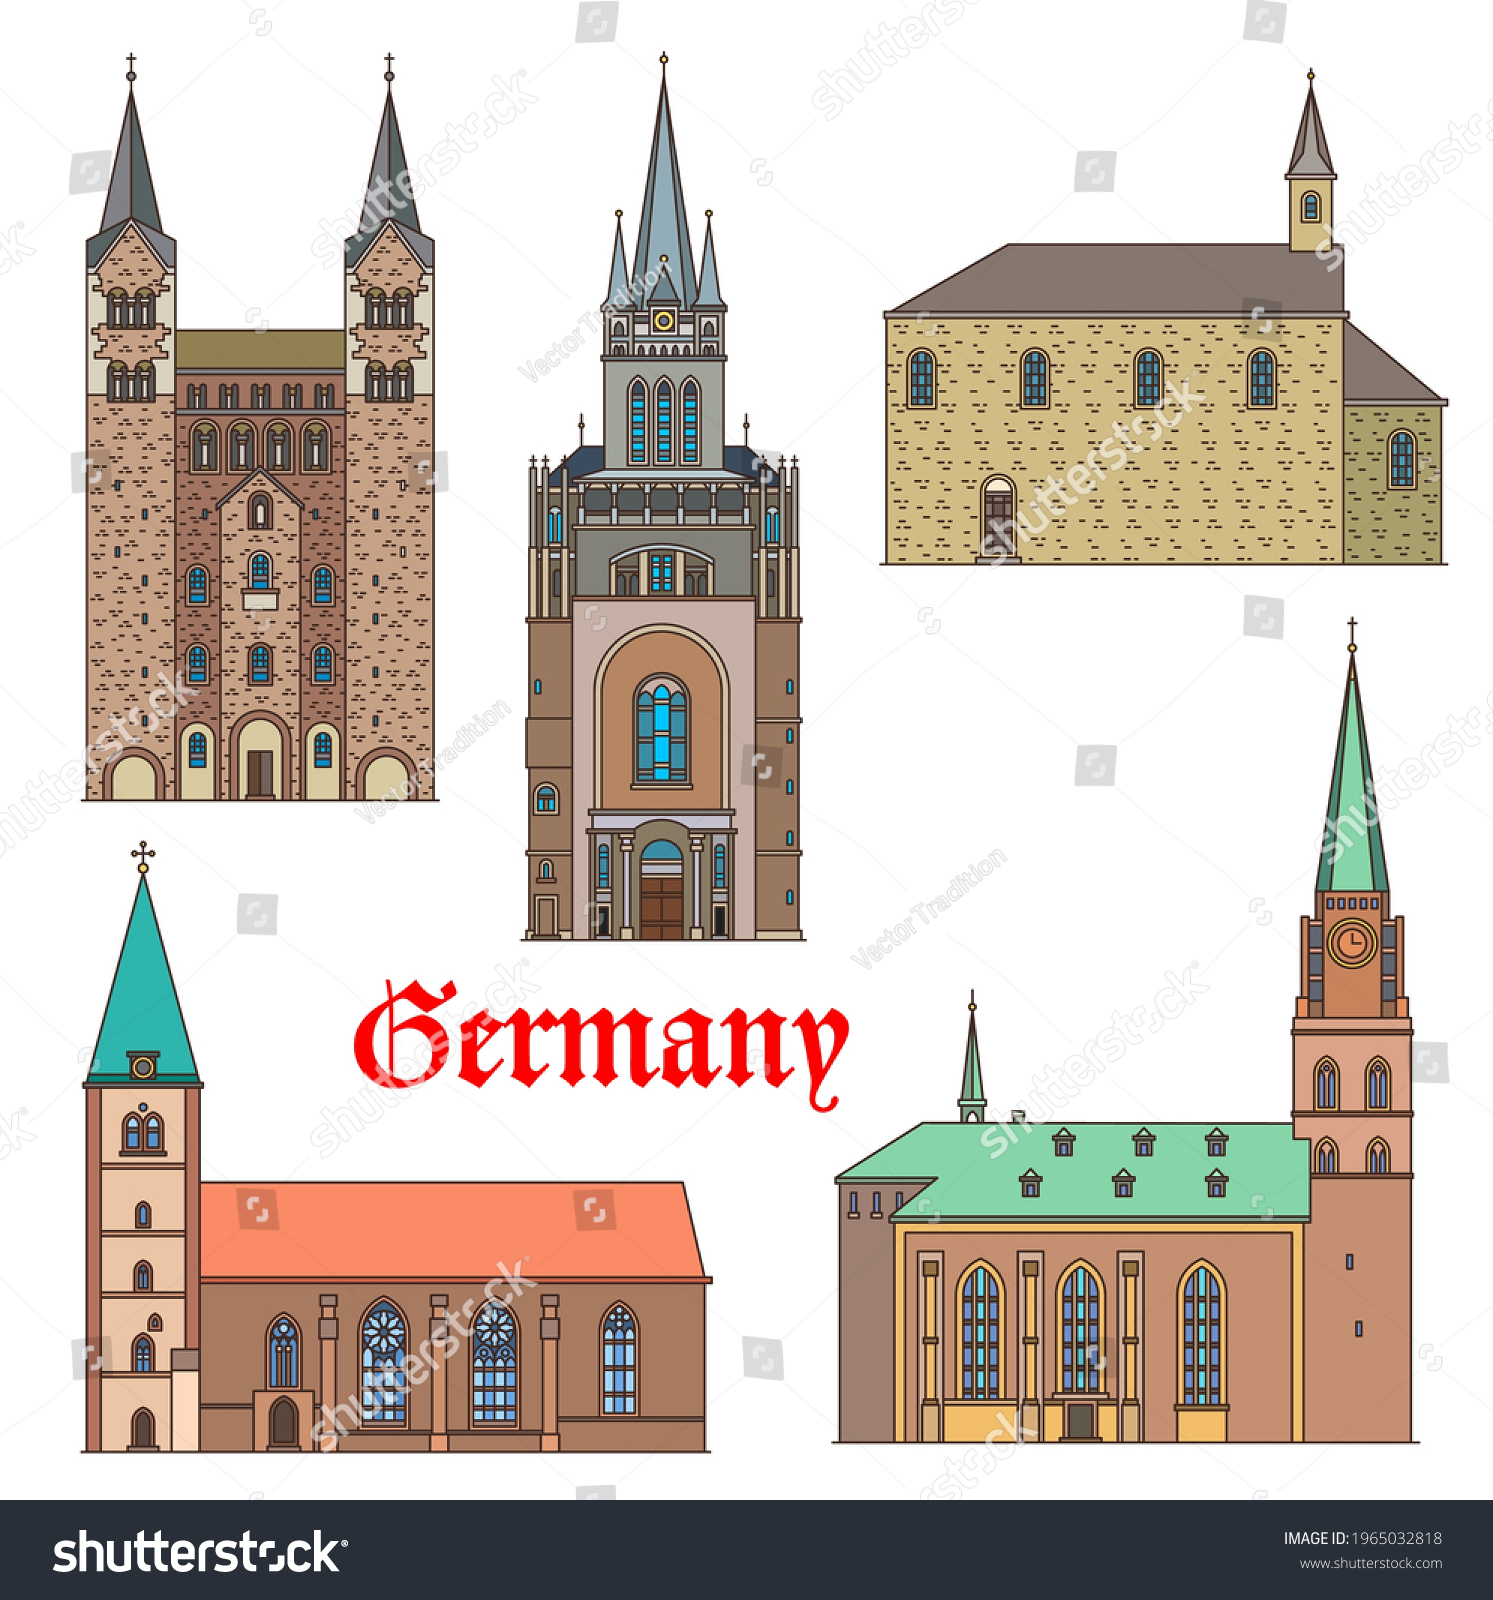 SVG of Germany landmark buildings, architecture castles, gothic palaces and churches, vector. Marienkirche in Lemgo, Hoxter Corvey Abbey, St Nikolai chapel in Soest, Bielefeld church and Aachen Pfalz palace svg